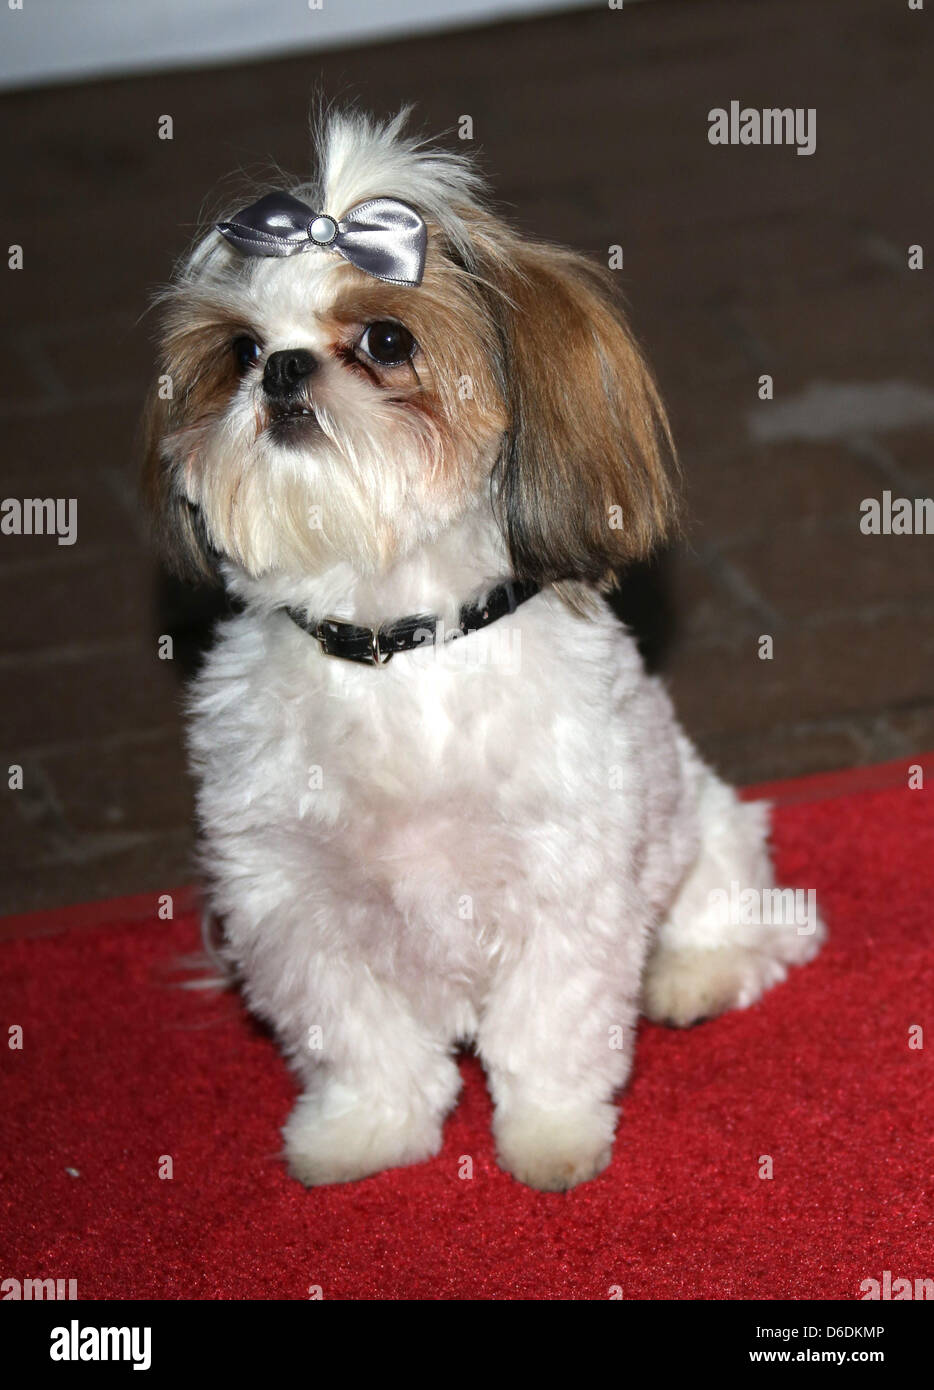 Bonnie The Dog arrives at the premiere of 'Seven Psychopaths' during the Toronto International Film Festival at Ryerson Theatre in Toronto, Canada, on 07 September 2012. Photo: Hubert Boesl Stock Photo